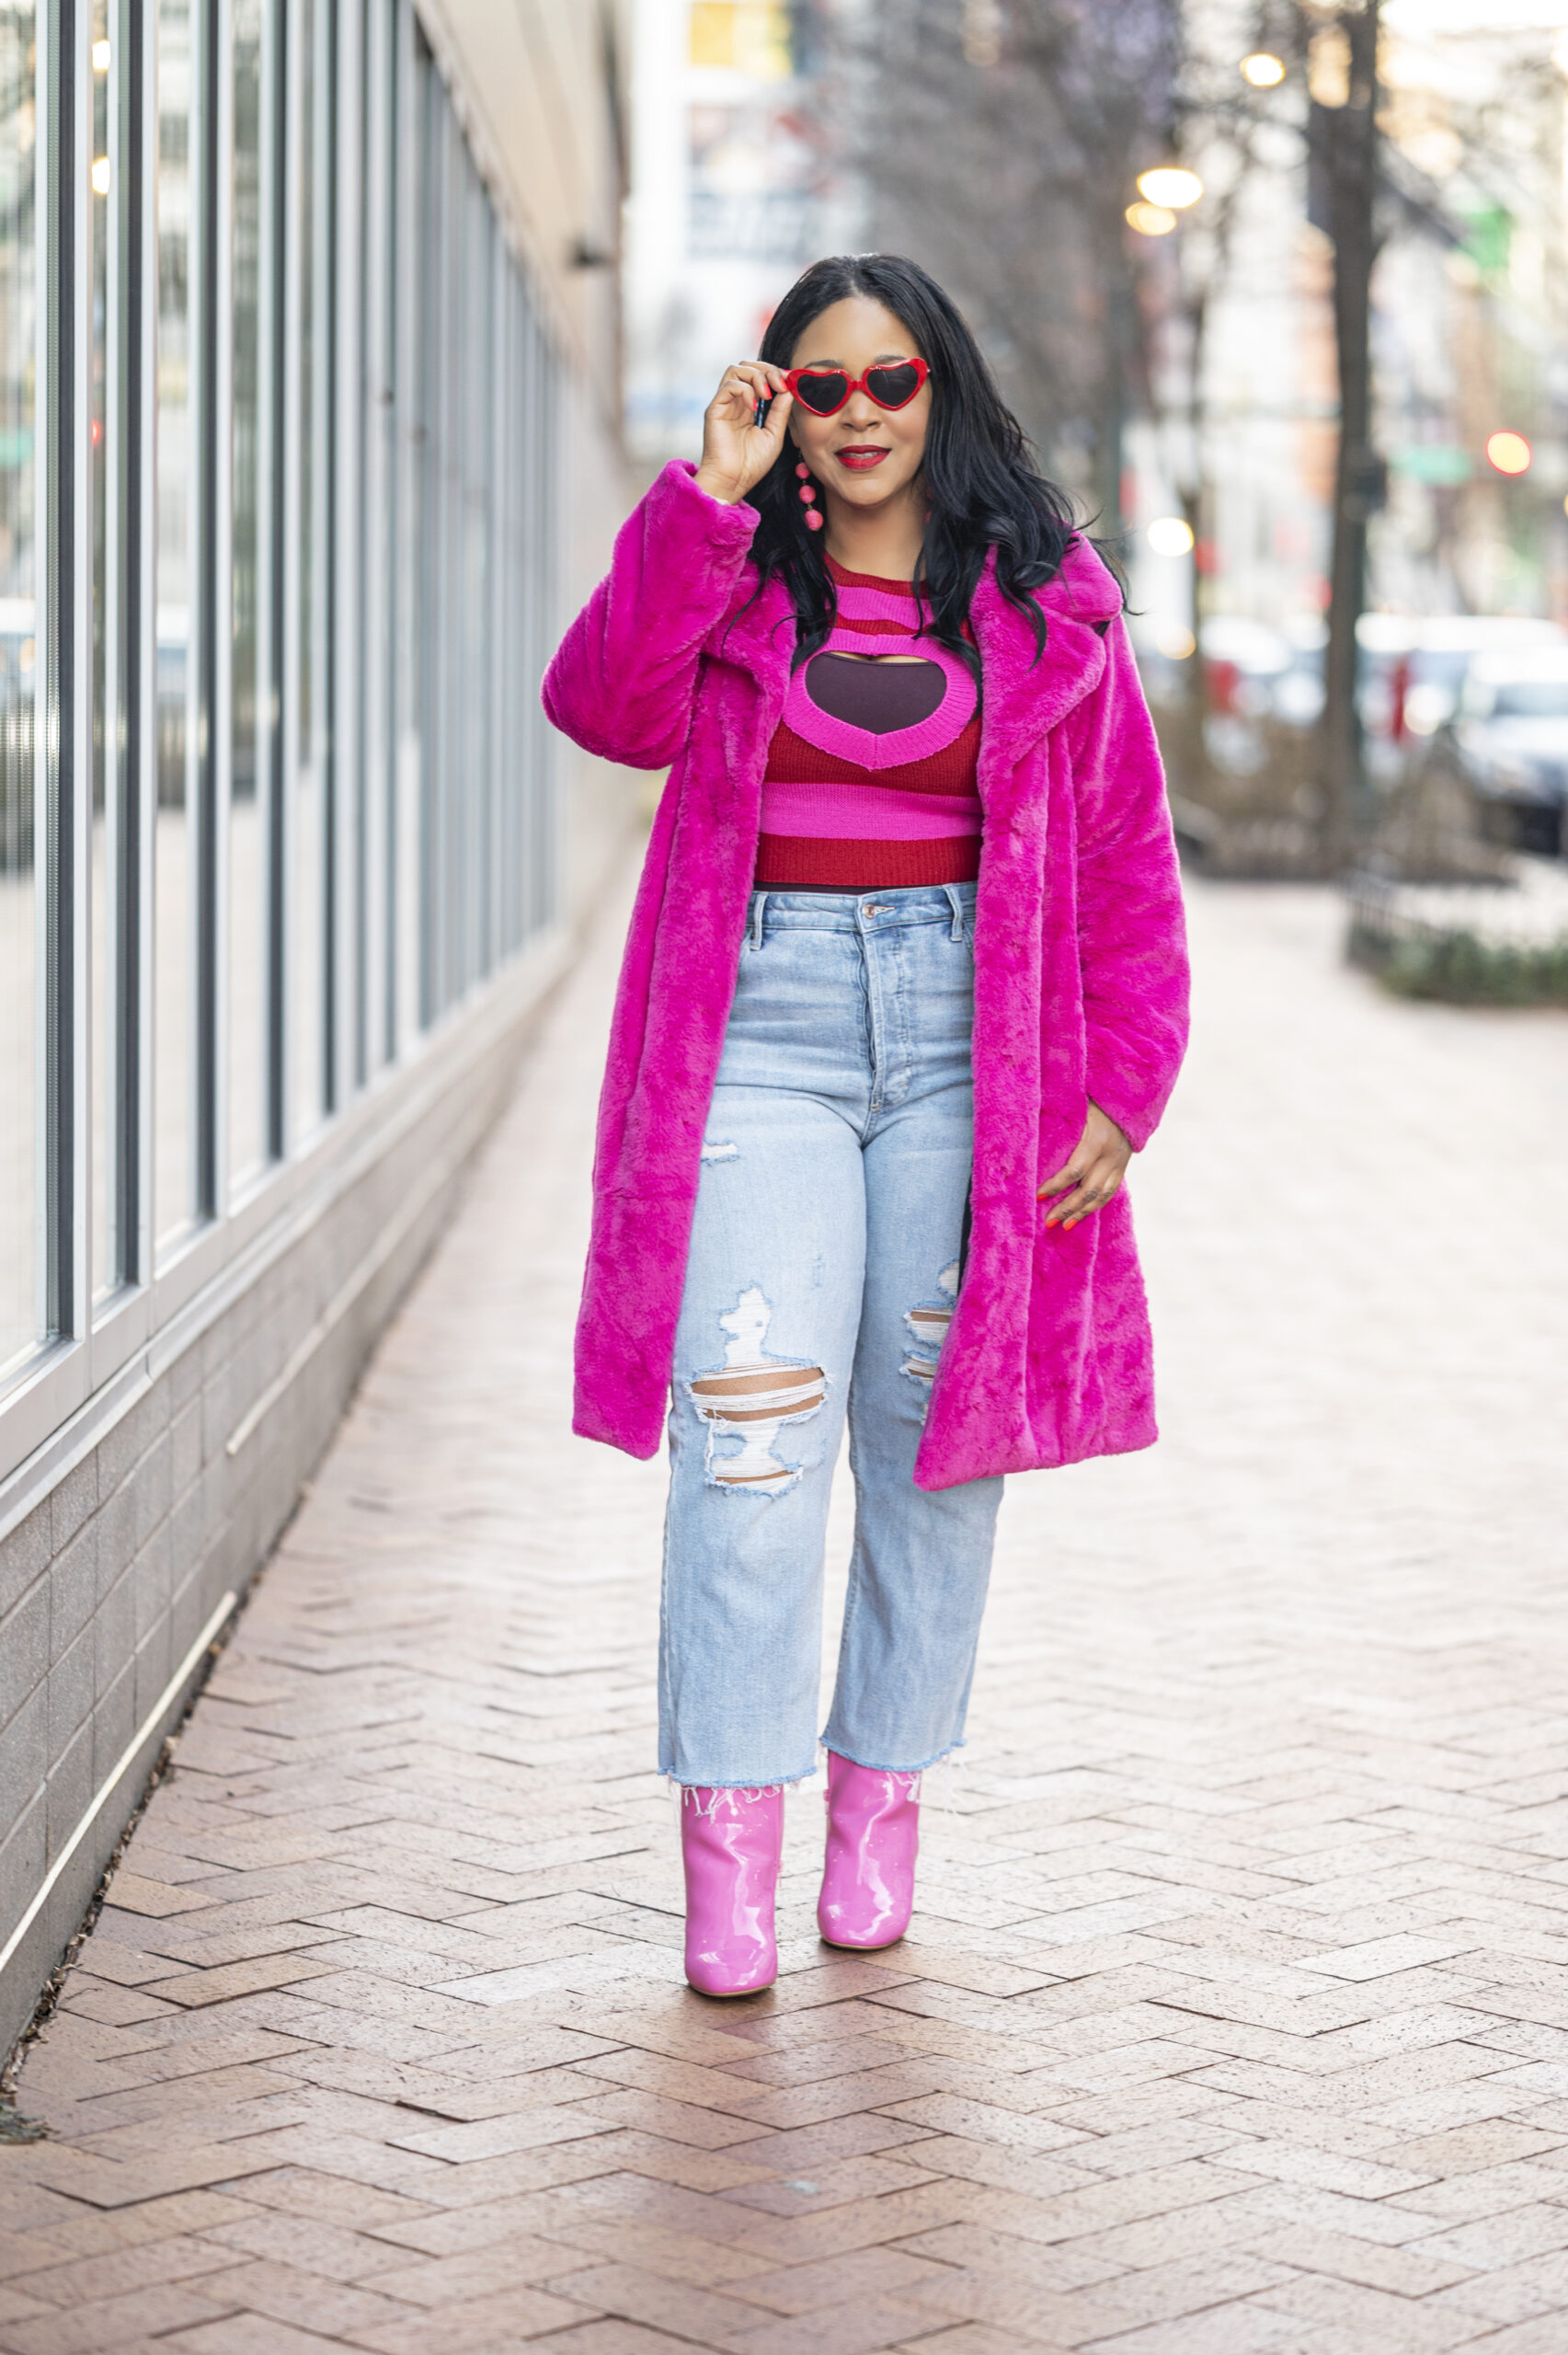 Happy Valentine's Day - What I'm Wearing: Heart Sunglasses, Faux Fur Coat, Cut Out Heart Pattern Colorblock Drop Shoulder Sweater, High Waisted Mom Jeans, Faux Patent Leather Zip-Up Block Heel Booties